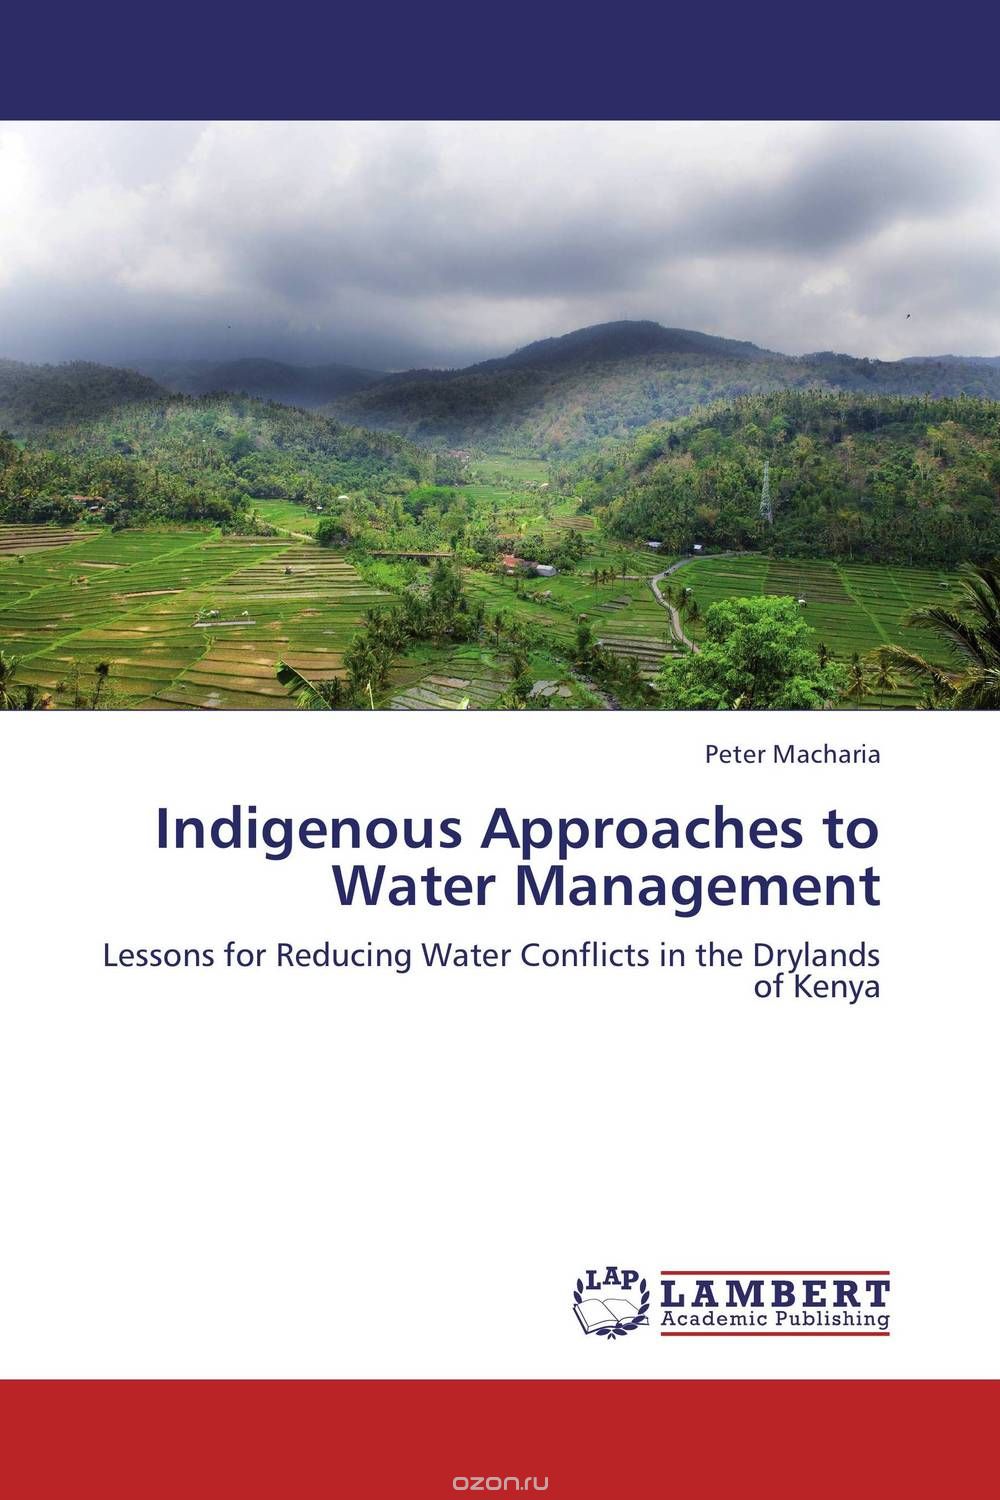 Скачать книгу "Indigenous Approaches to Water Management"